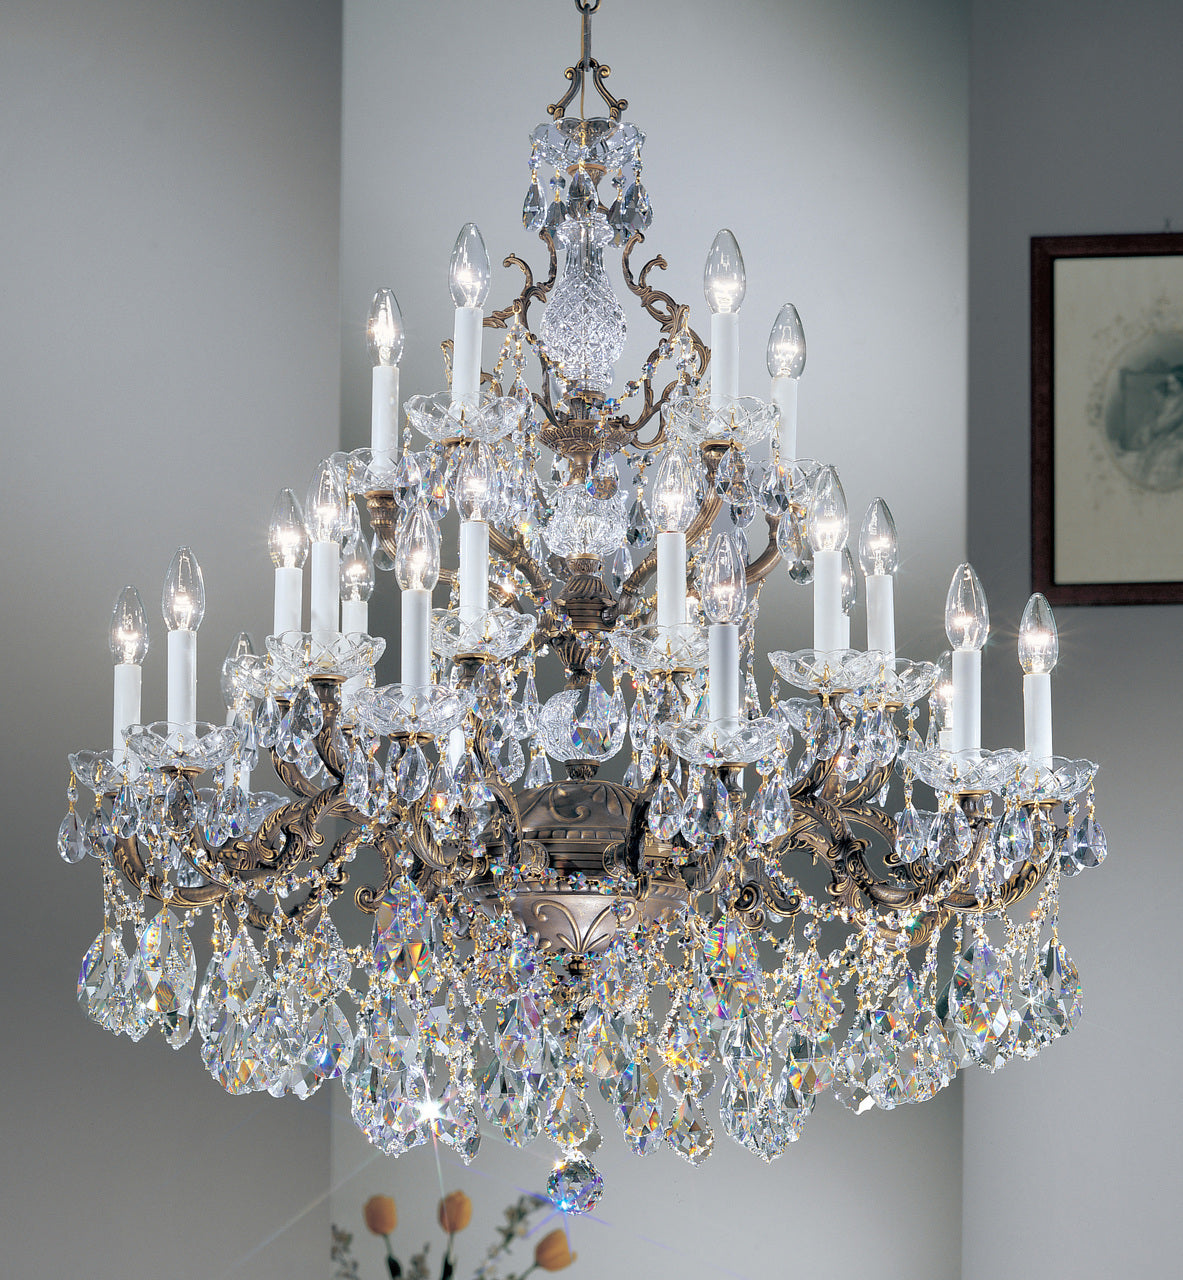 Classic Lighting 5545 OWB C Madrid Imperial Crystal/Cast Brass Chandelier in Olde World Bronze (Imported from Spain)